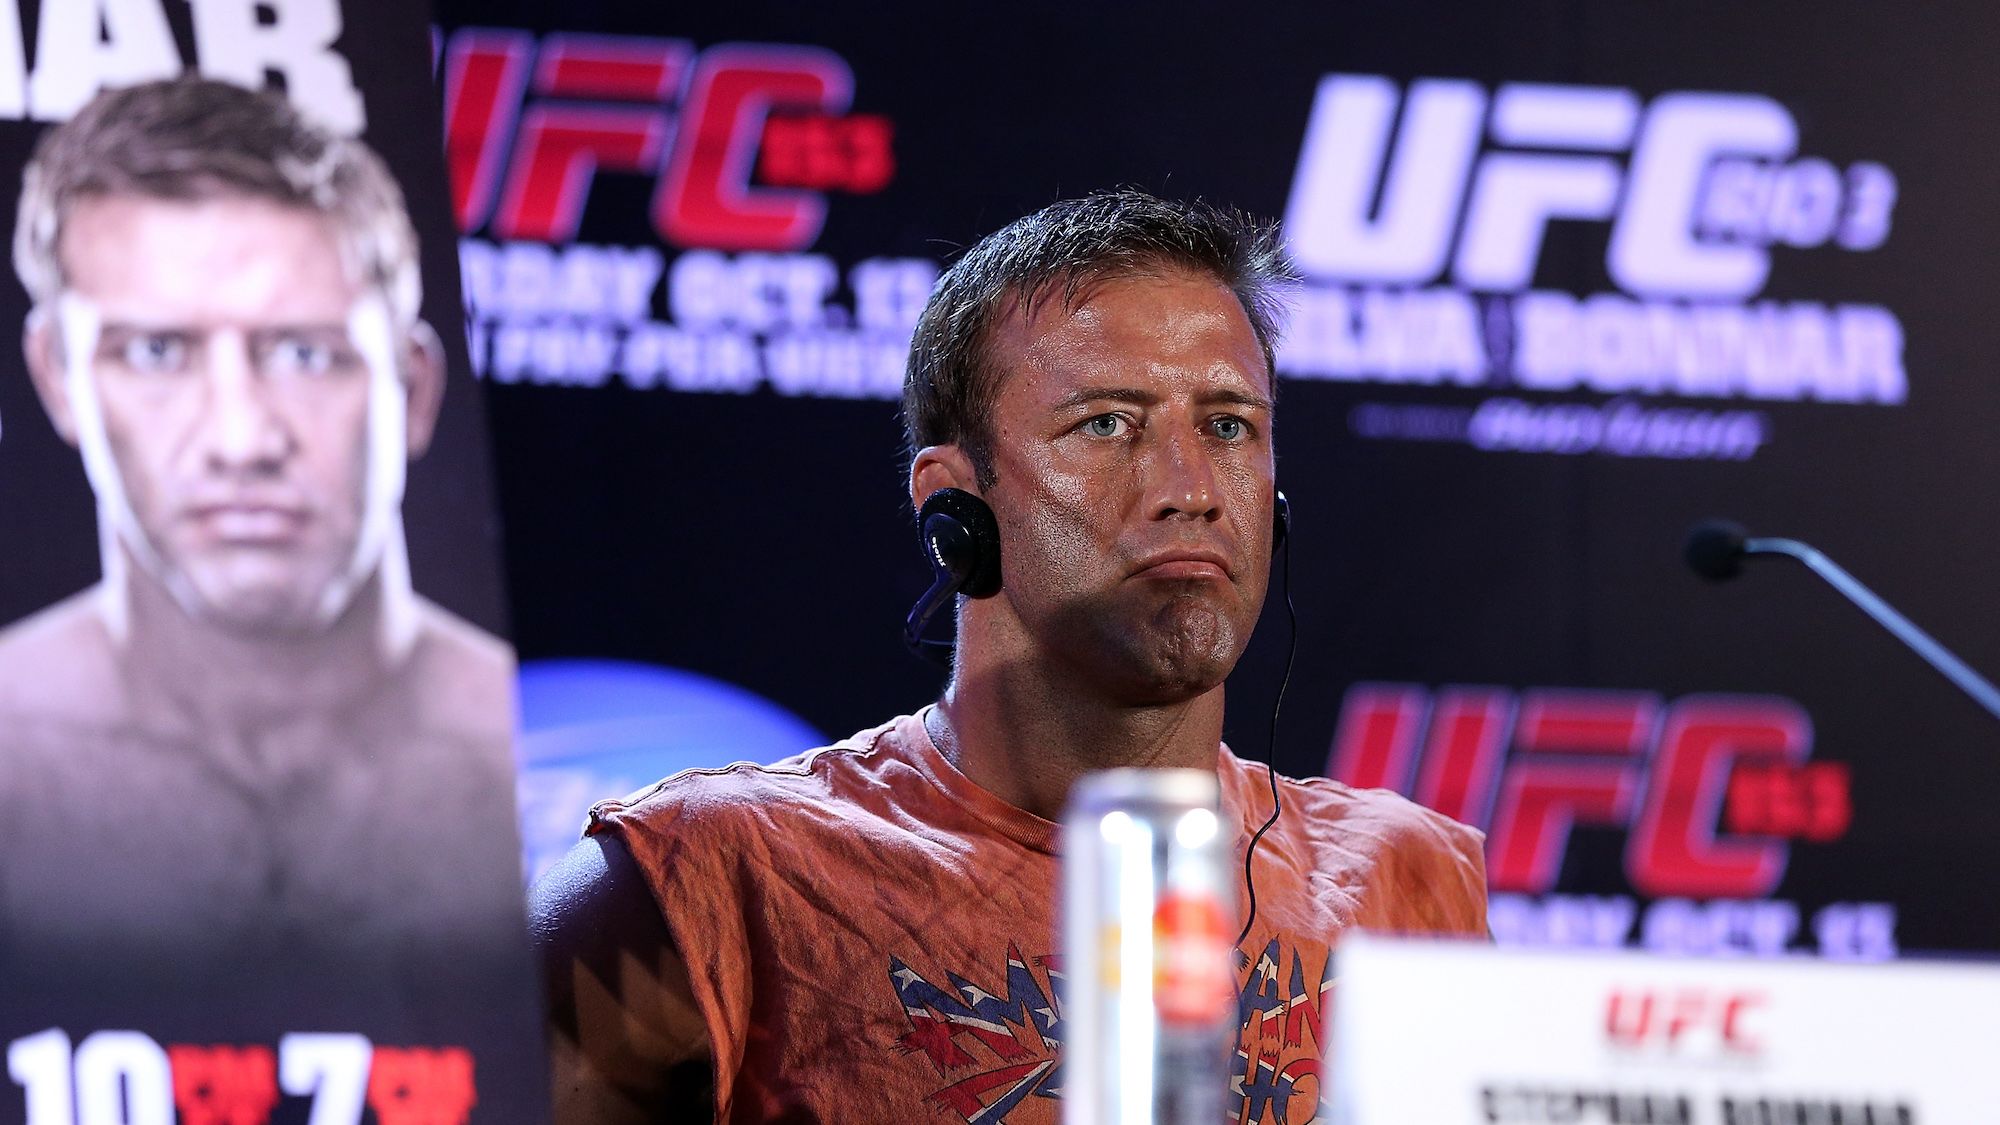 Stephan Bonnar ahead of UFC fight in 2012. He had a 17-9 record during his seven-year light heavyweight career. 